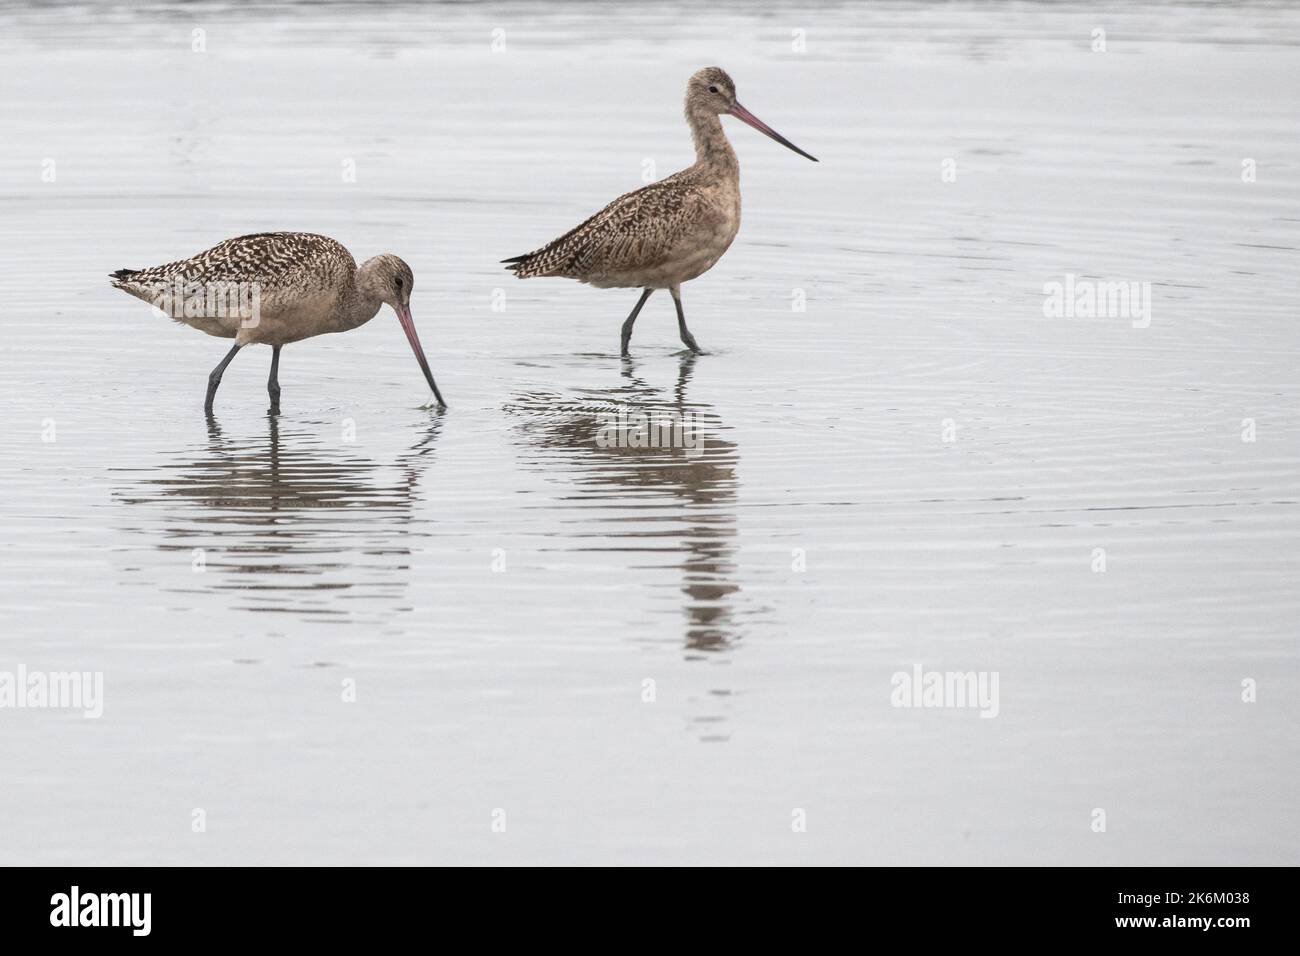 A pair of marbled godwits (Limosa fedoa) walking & feeding in the shallow water at low tide in the San Francisco Bay in California. Stock Photo